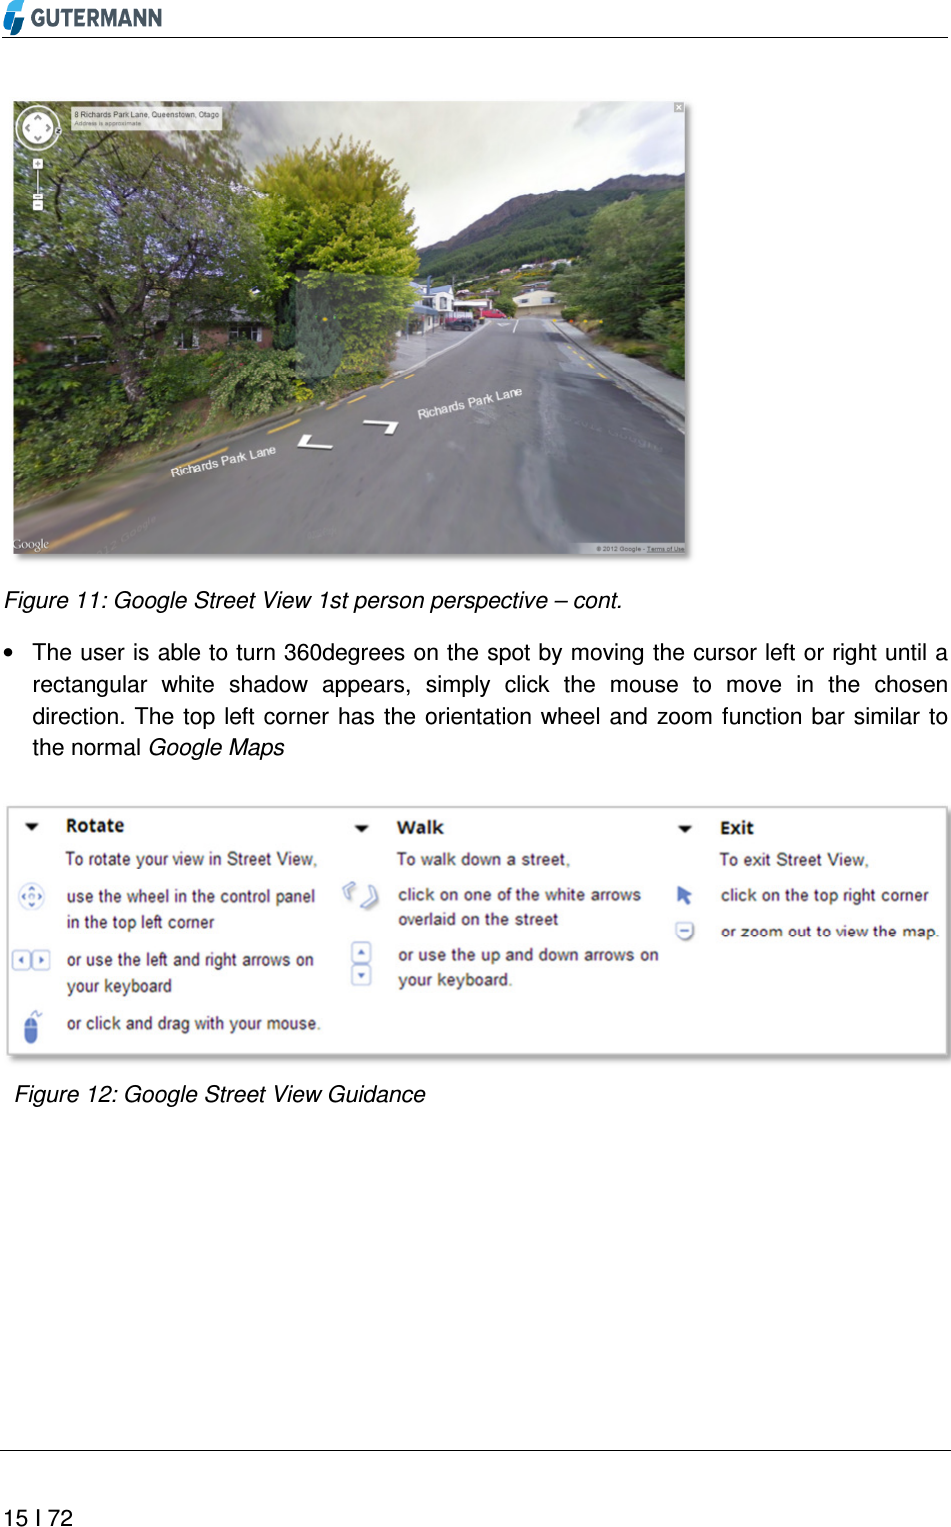       15 I 72    Figure 11: Google Street View 1st person perspective – cont. •  The user is able to turn 360degrees on the spot by moving the cursor left or right until a rectangular  white  shadow  appears,  simply  click  the  mouse  to  move  in  the  chosen direction. The top left corner  has  the orientation wheel and  zoom function bar  similar  to the normal Google Maps   Figure 12: Google Street View Guidance    